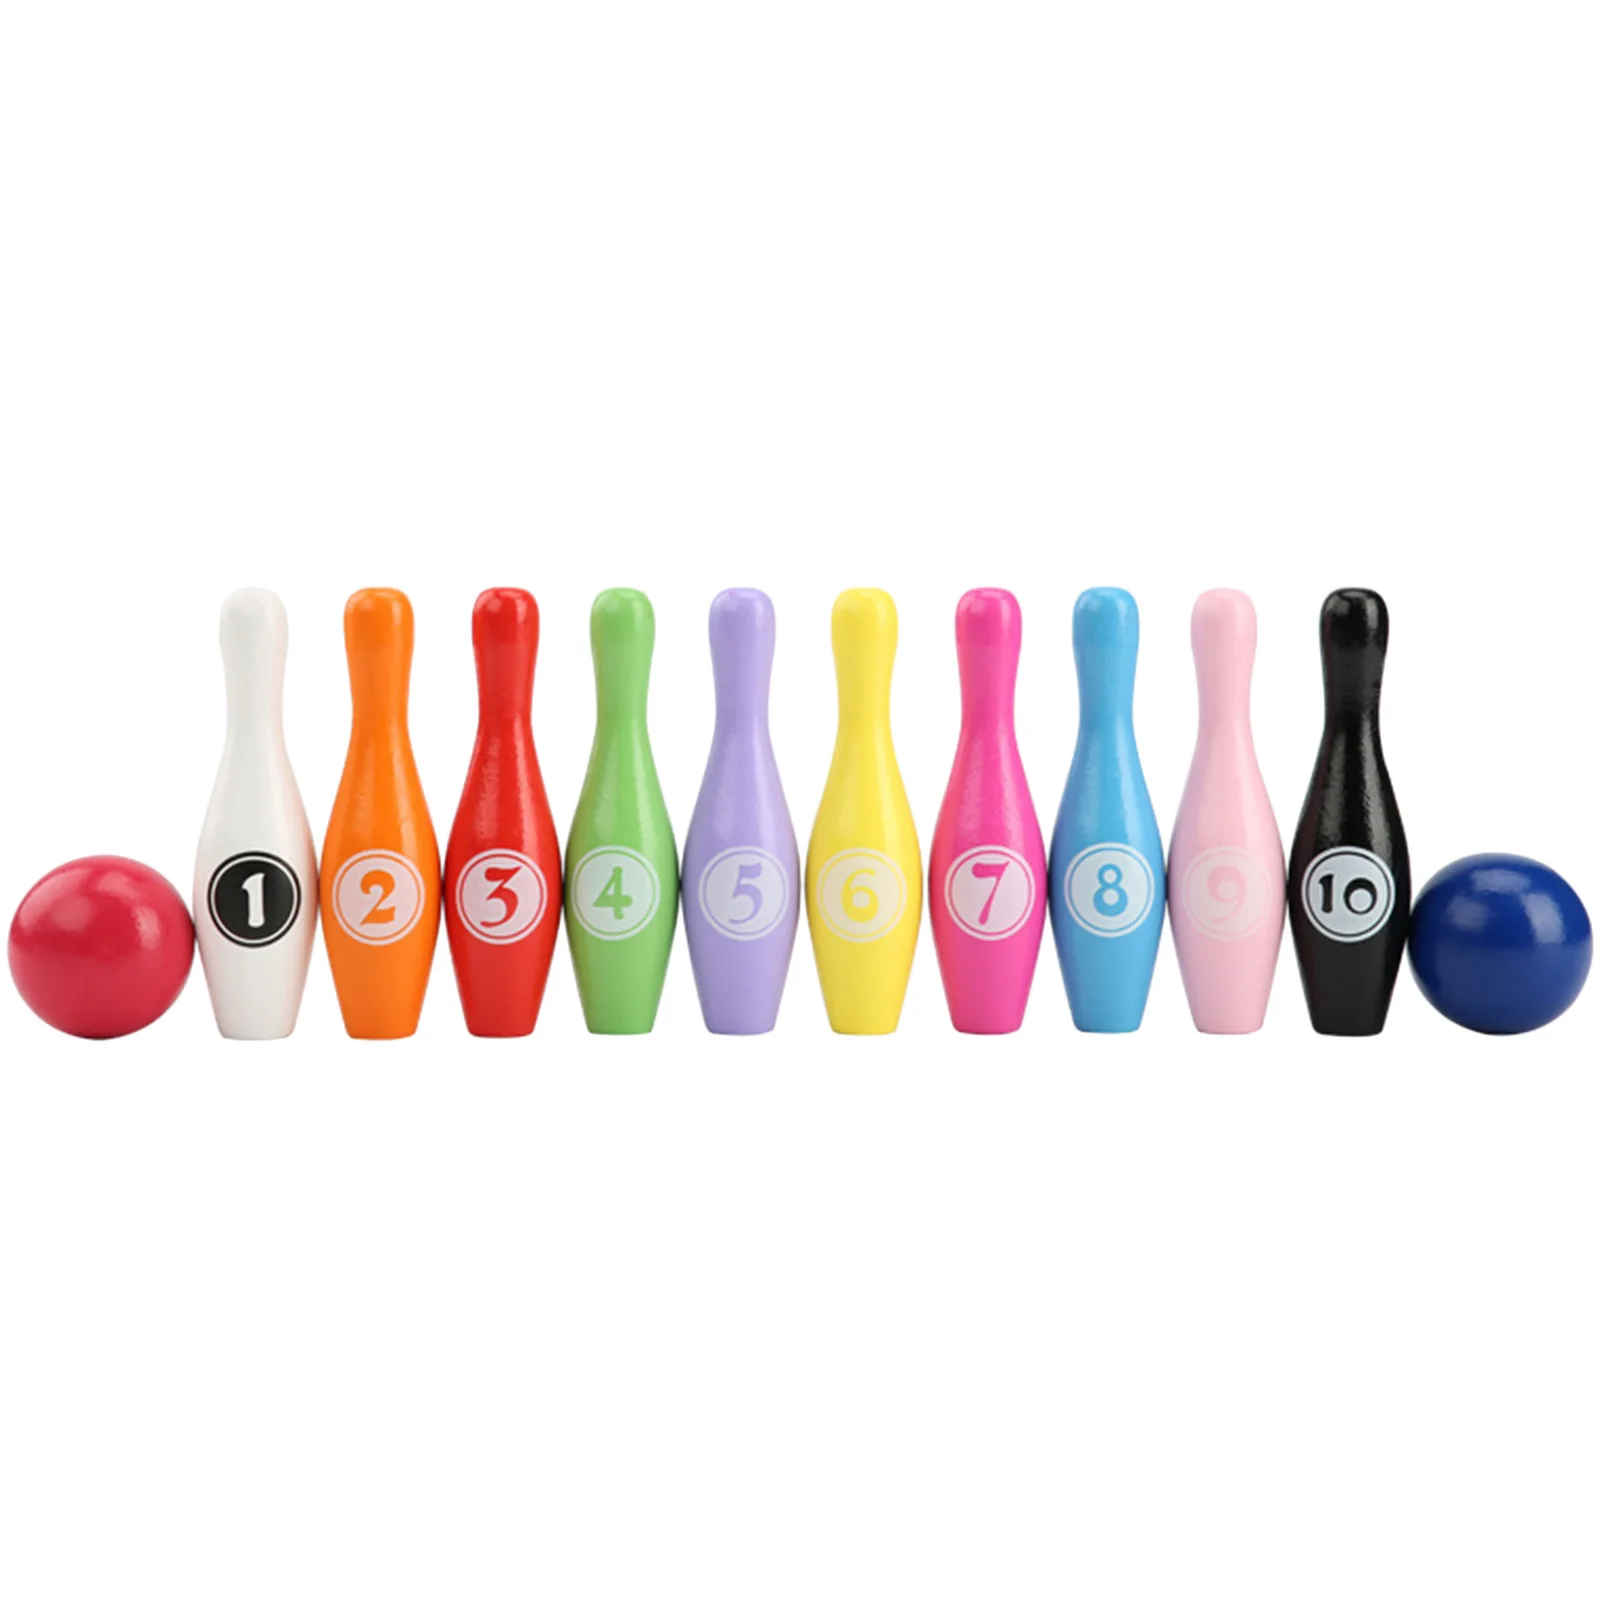 Kids Bowling Set Includes 10 Classic Colorful Pins And 2 Balls Early Education Indoor And Outdoor Games for Age Children